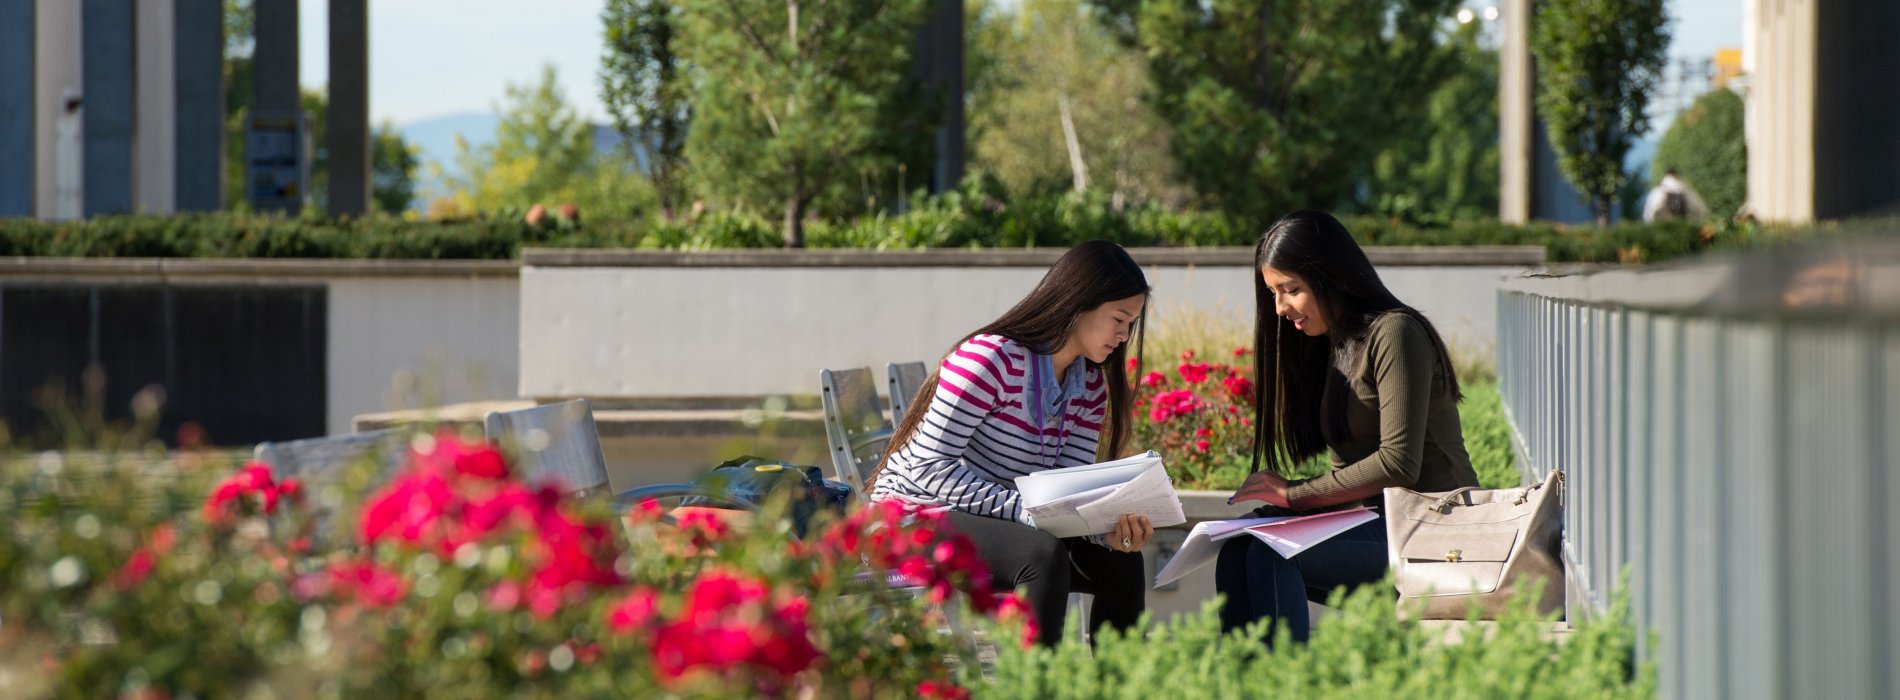 Two students looking over notebooks sit on outdoor benches surrounded by flowers 